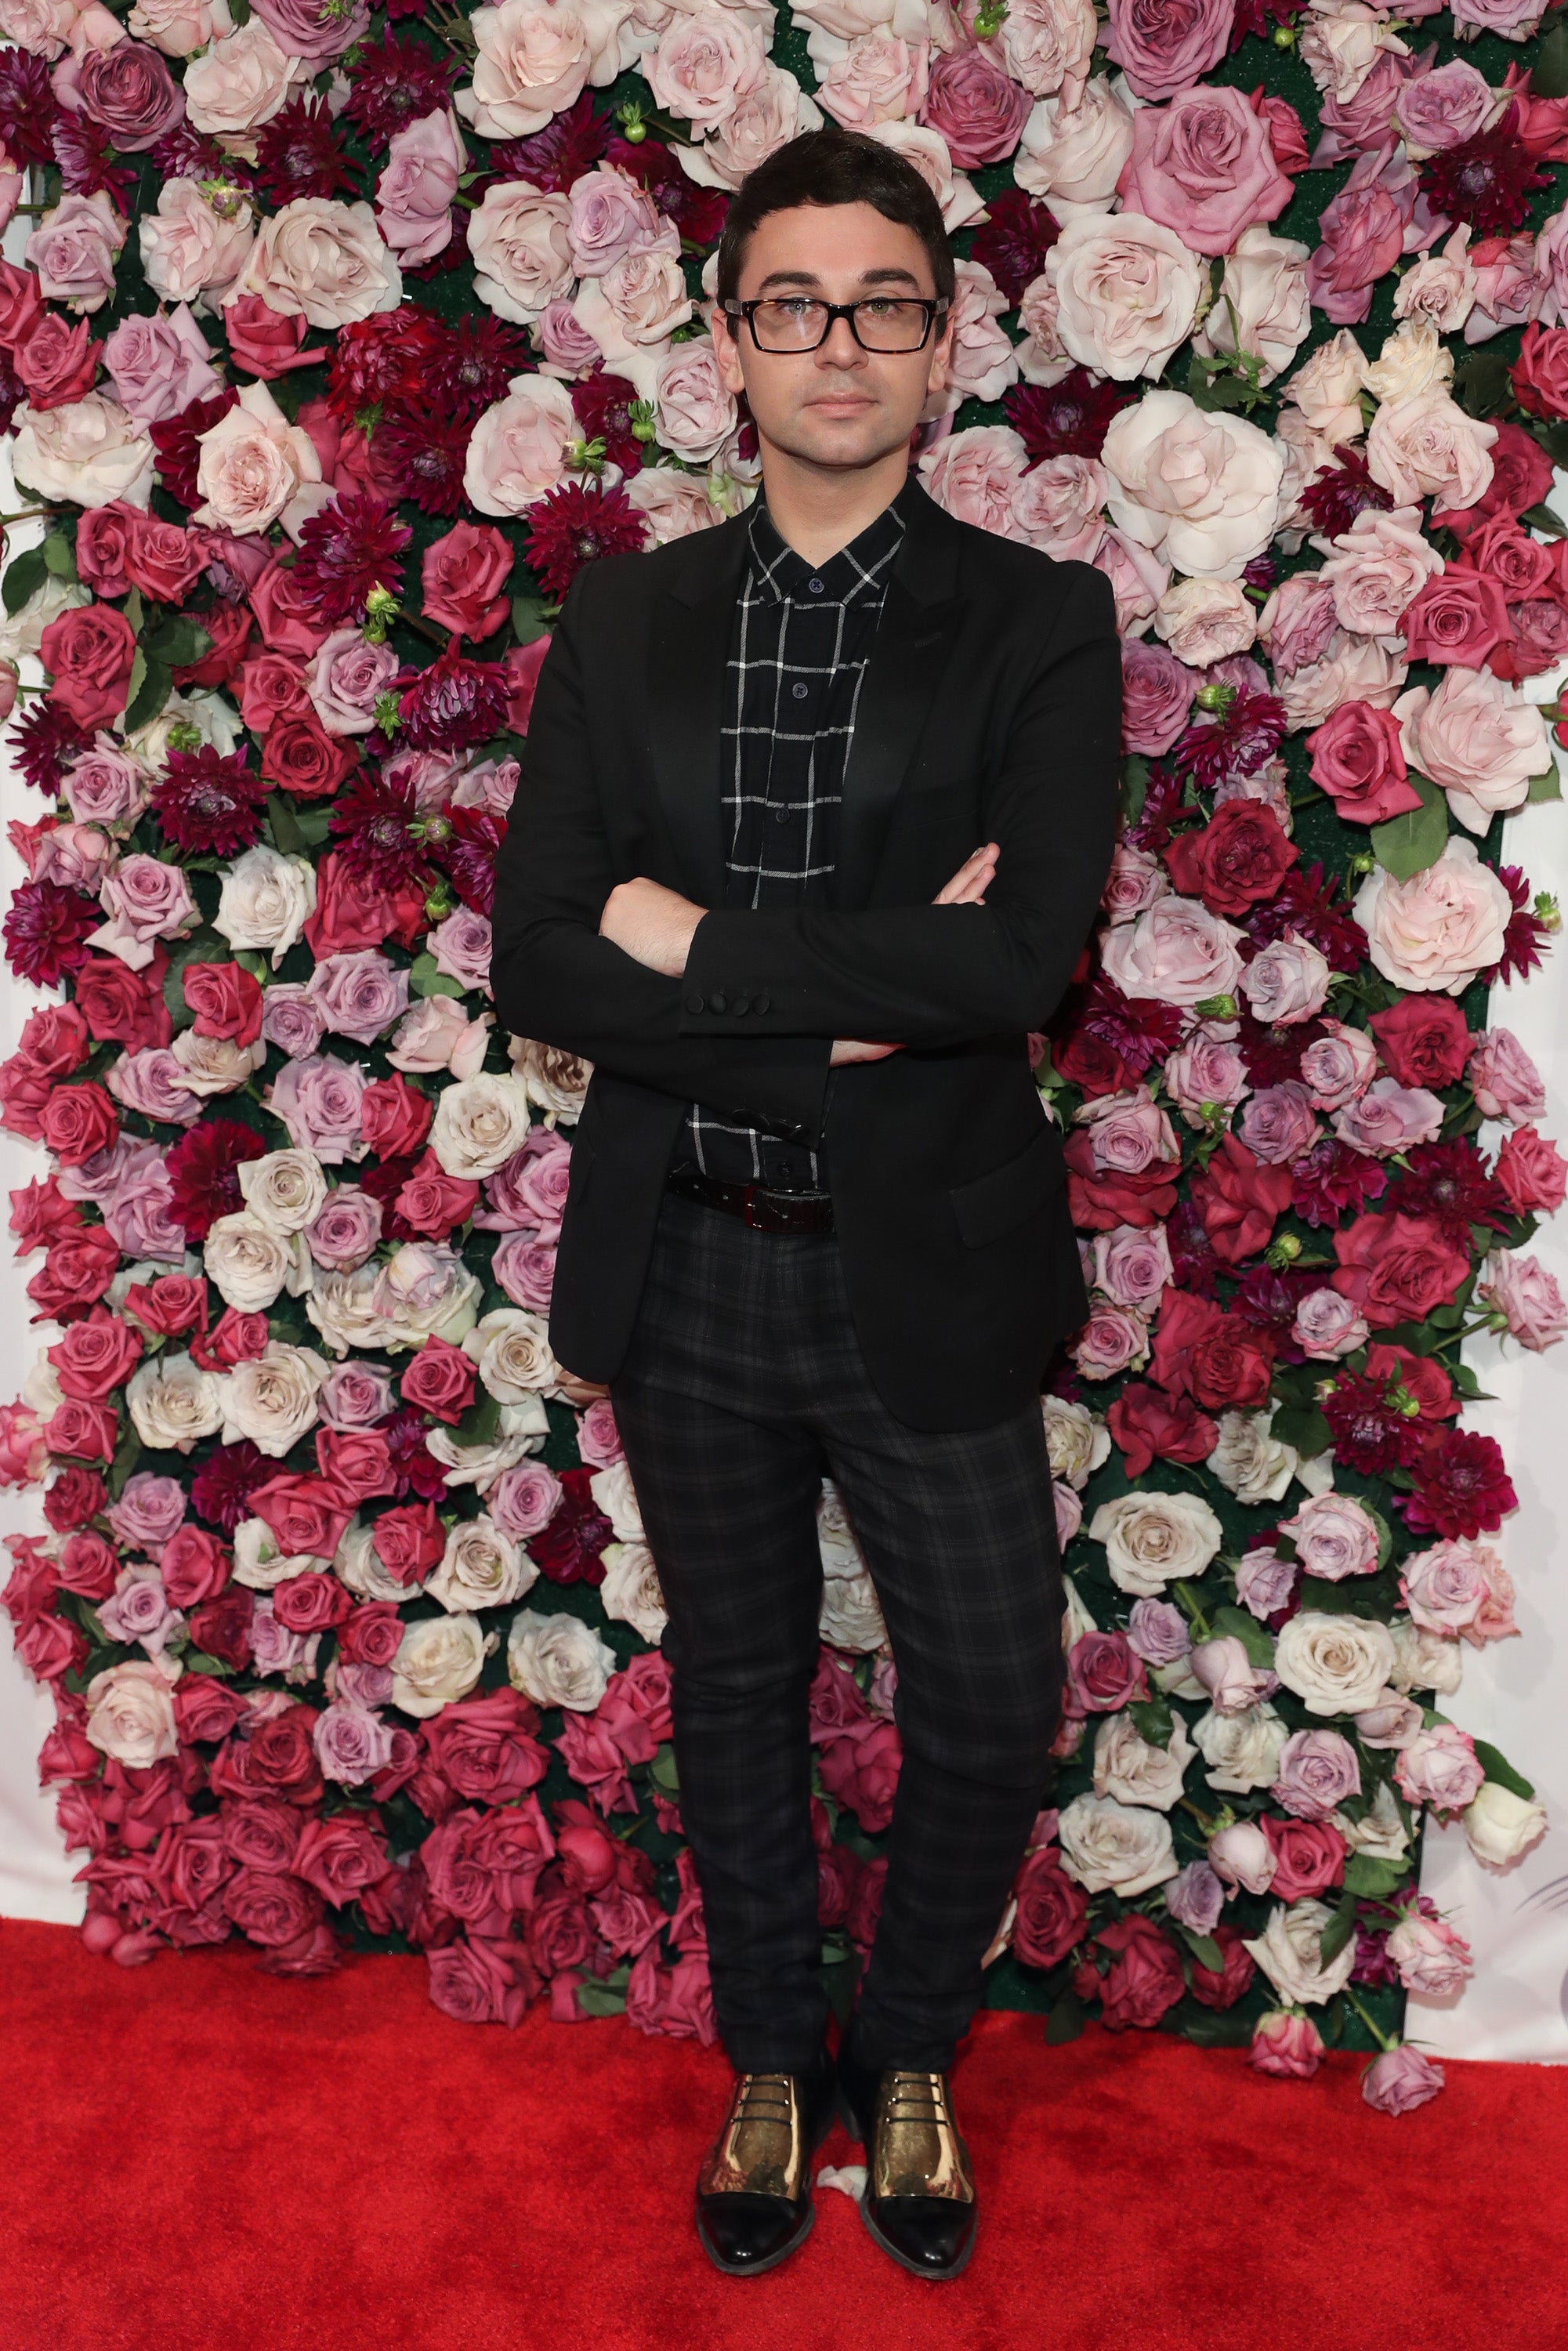 Christian Siriano Talks Diversity And Body Positivity In The Fashion Industry